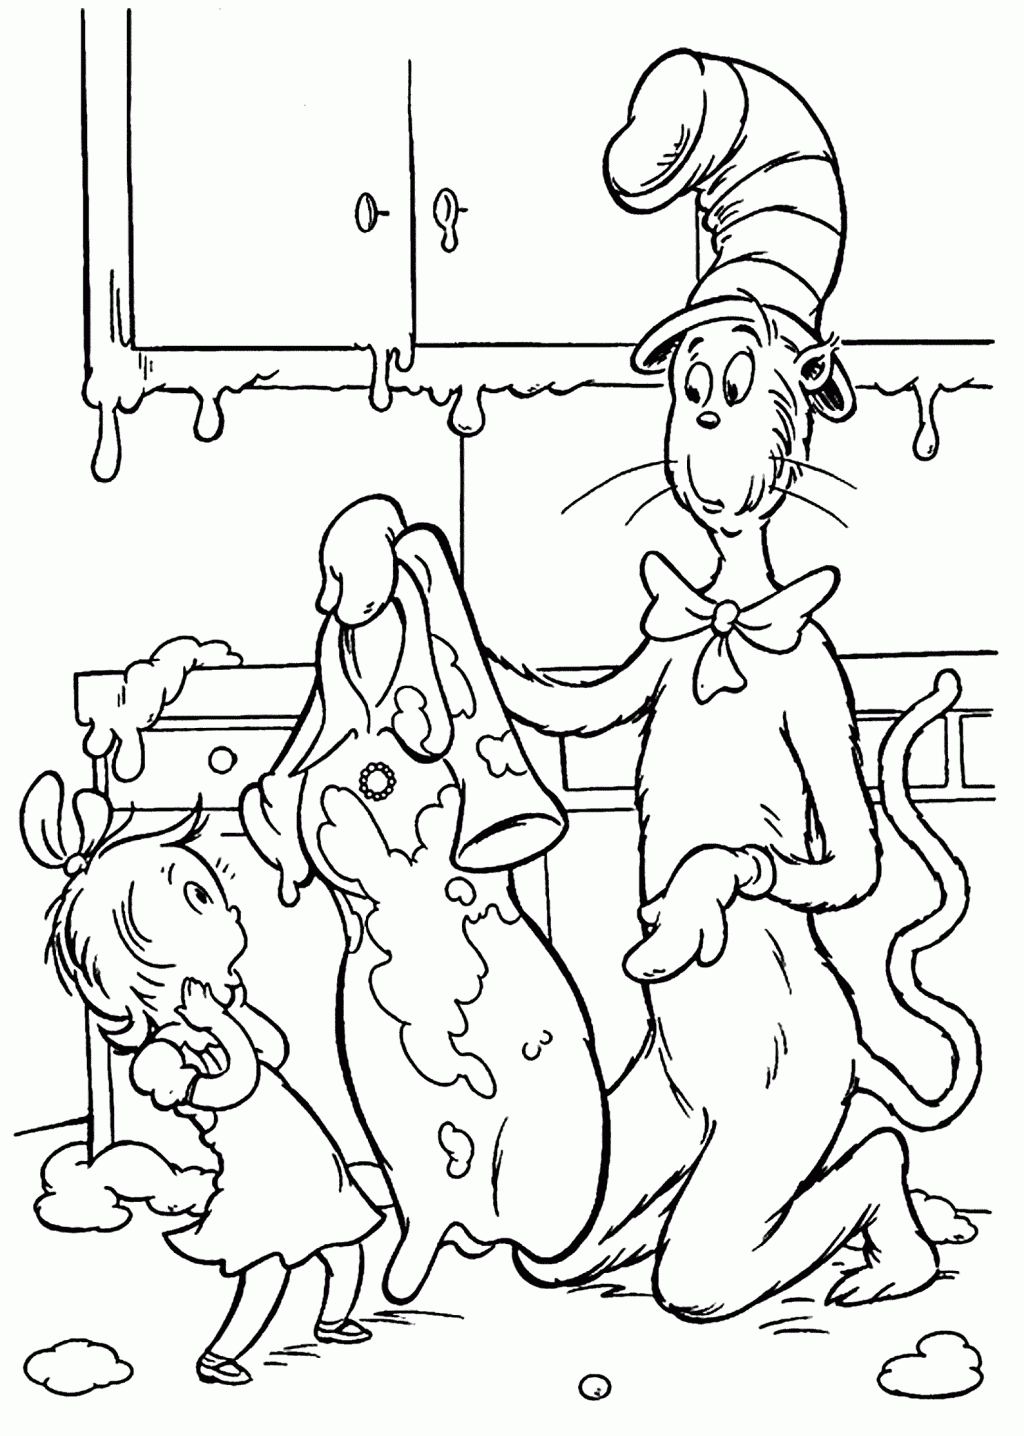 Cat In The Hat Coloring Page Coloring Pages Cat In The Hat Coloringok 